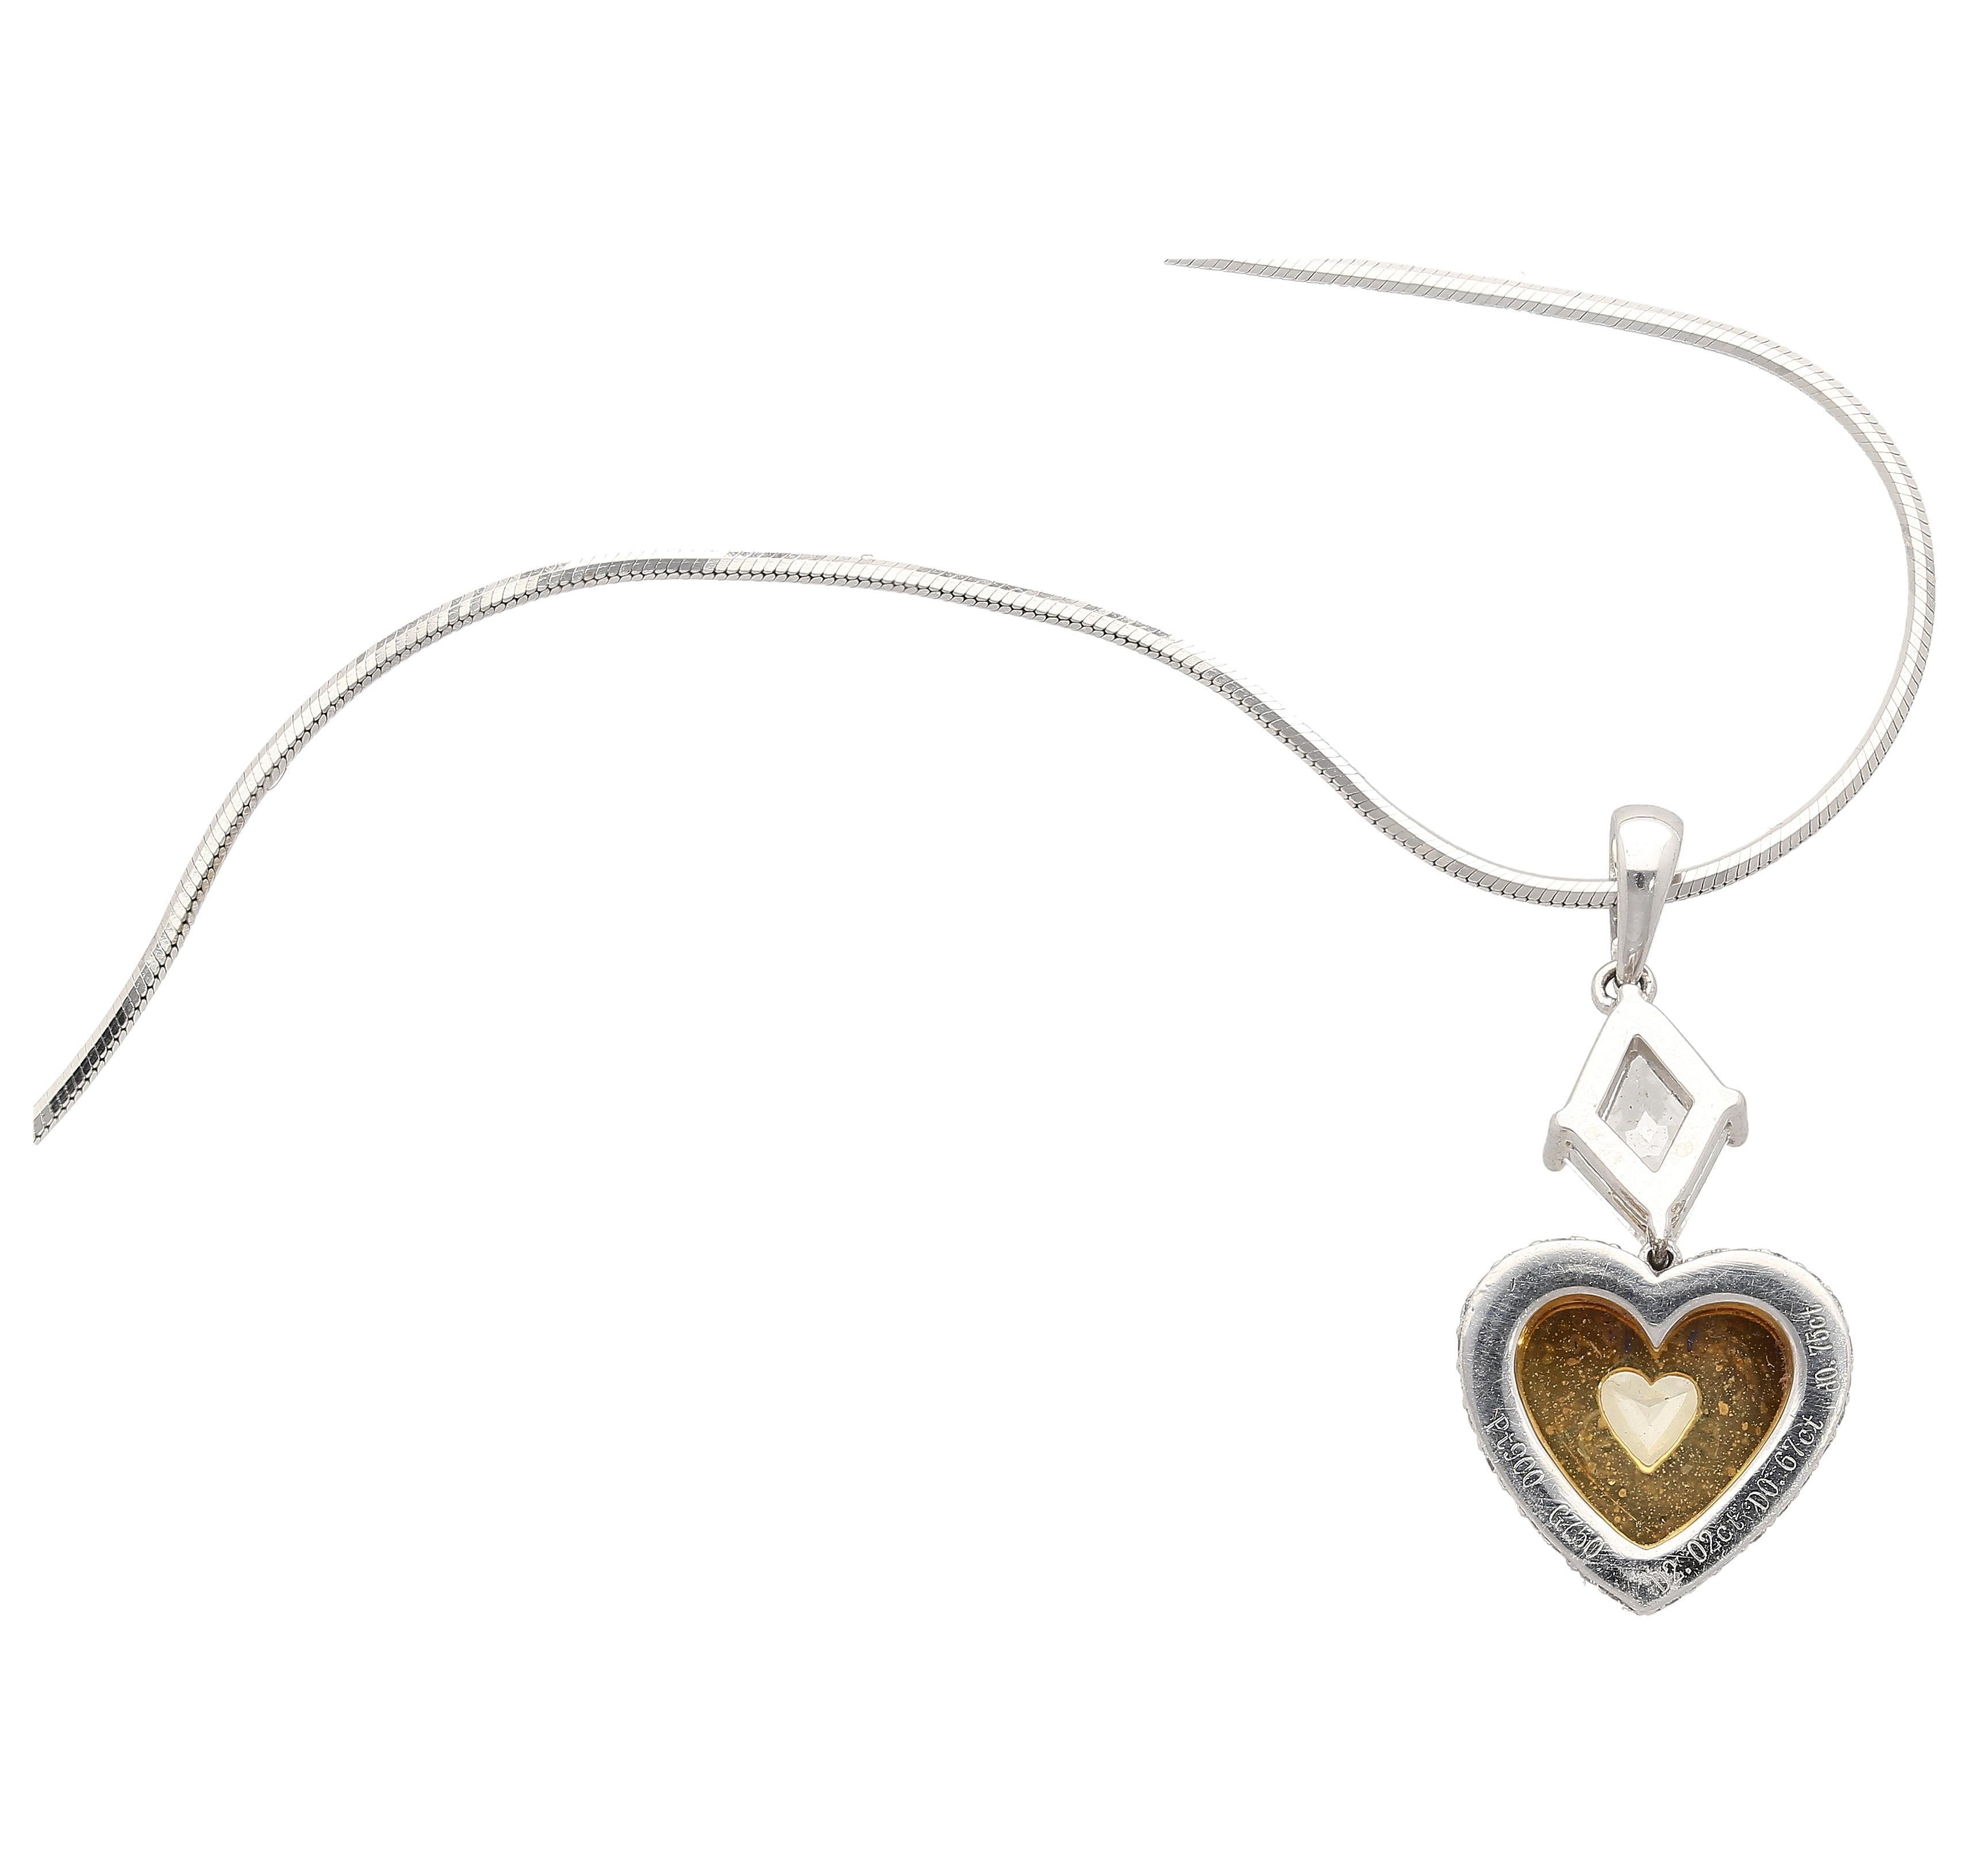 Natural Fancy Yellow Diamond Heart Platinum Necklace. 

This pendant necklace features a natural fancy yellow 2.02 carat heart-shaped diamond center stone, secured in a prong setting. The heart-shaped yellow diamond is GIA-certified.  This yellow